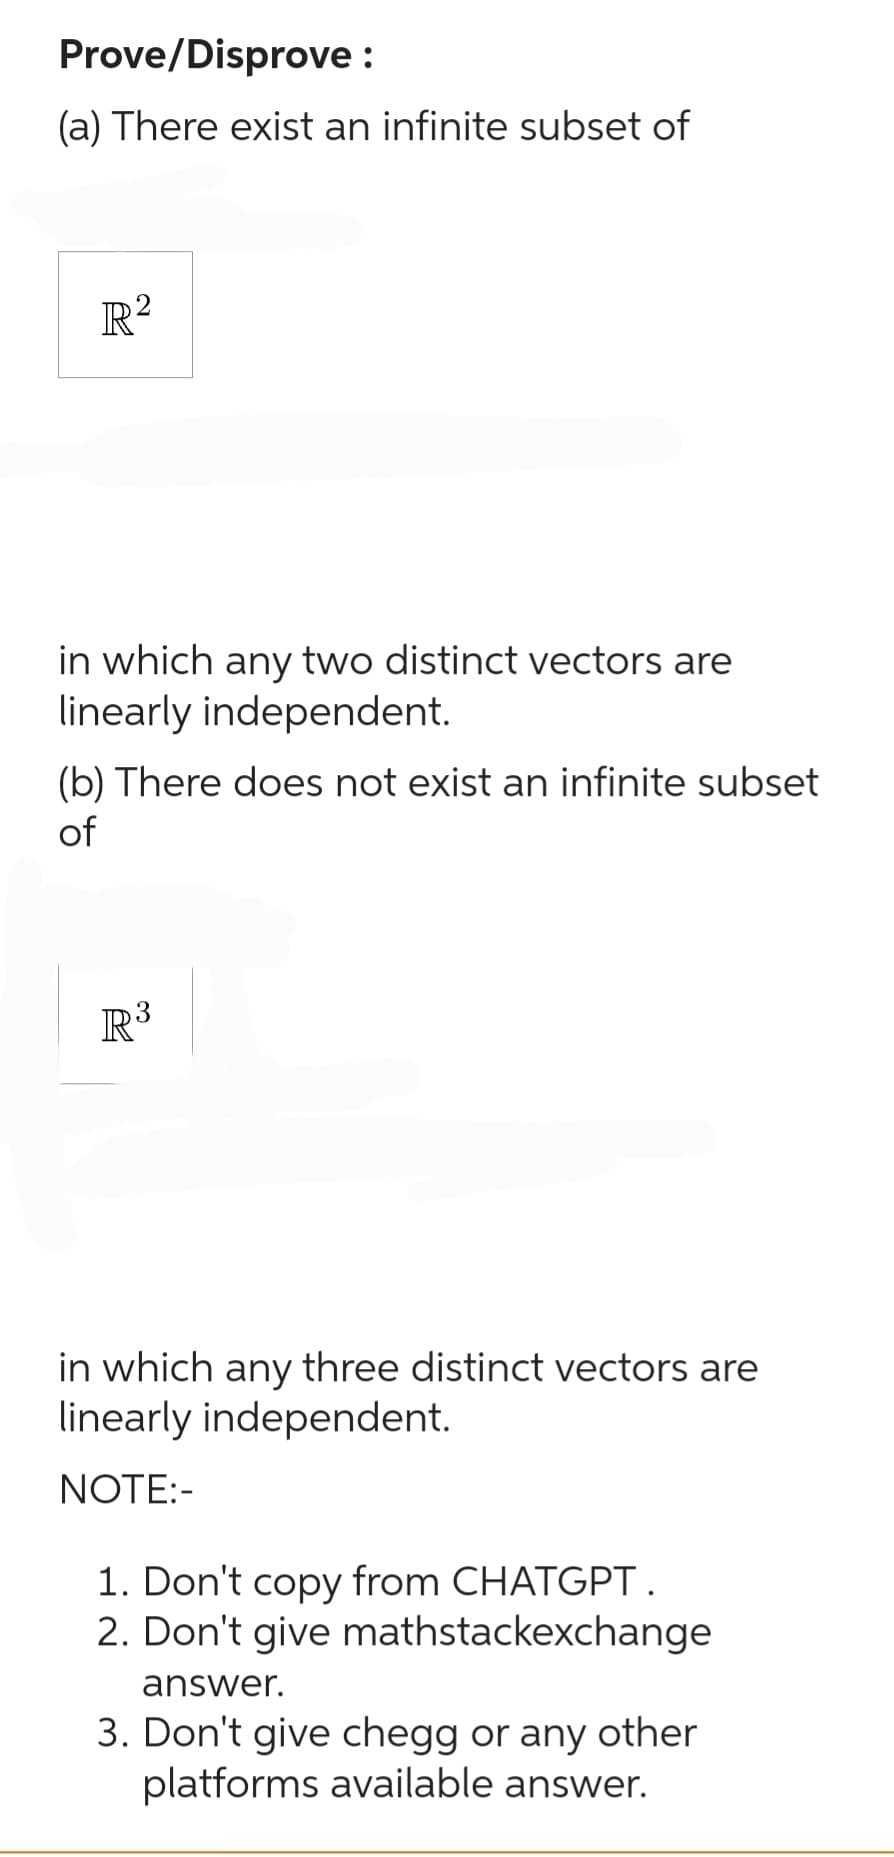 Prove/Disprove:
(a) There exist an infinite subset of
R²
in which any two distinct vectors are
linearly independent.
(b) There does not exist an infinite subset
of
R³
in which any three distinct vectors are
linearly independent.
NOTE:-
1. Don't copy from CHATGPT.
2. Don't give mathstackexchange
answer.
3. Don't give chegg or any other
platforms available answer.